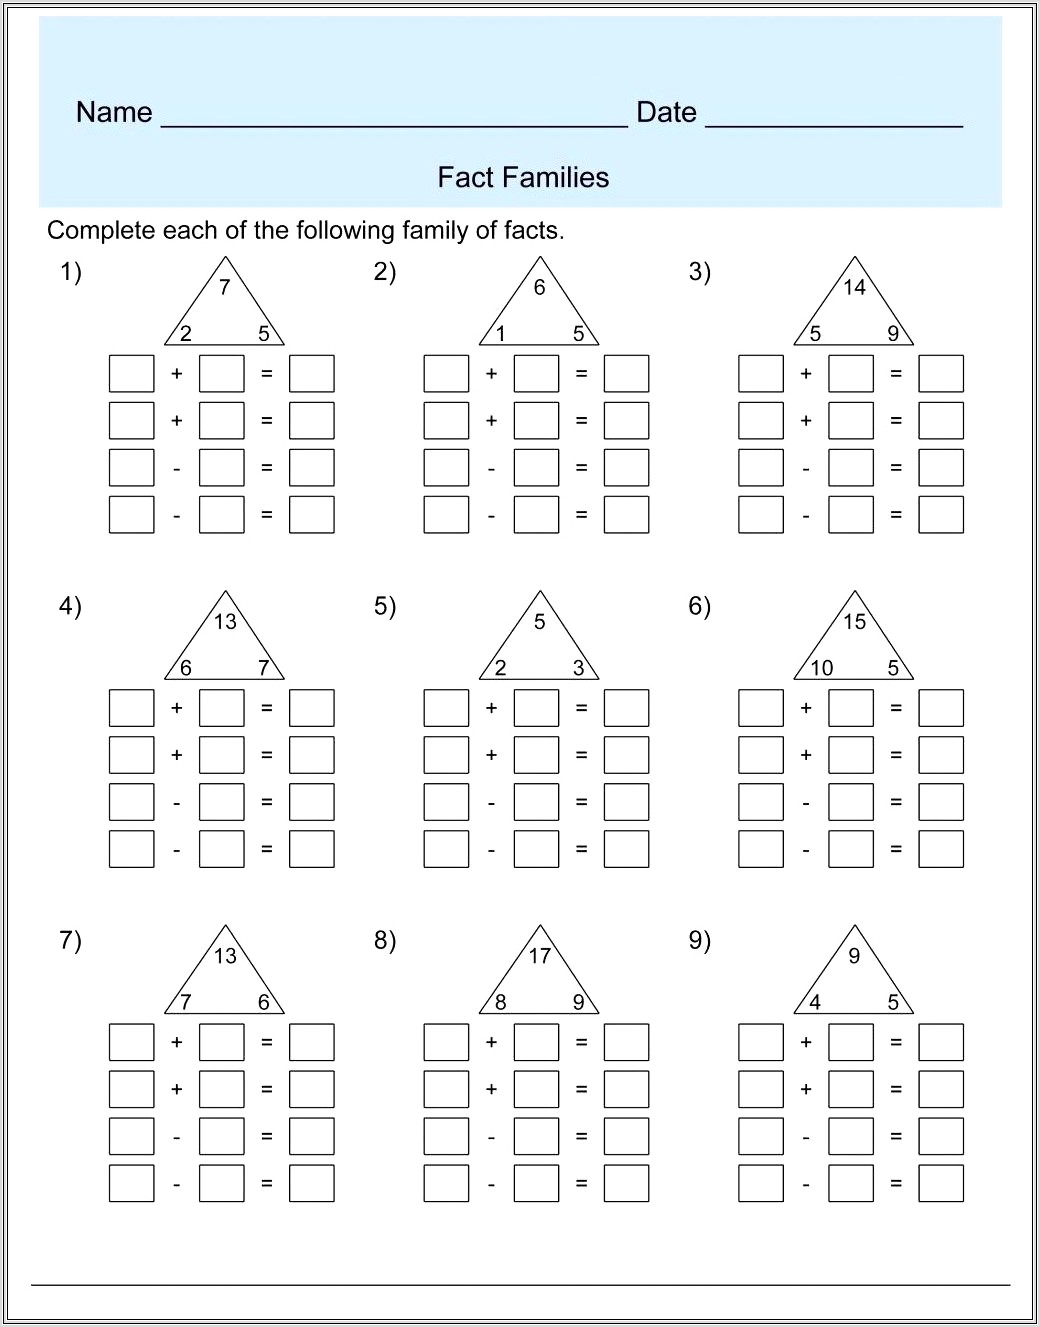 Fact Family Worksheet For Multiplication And Division